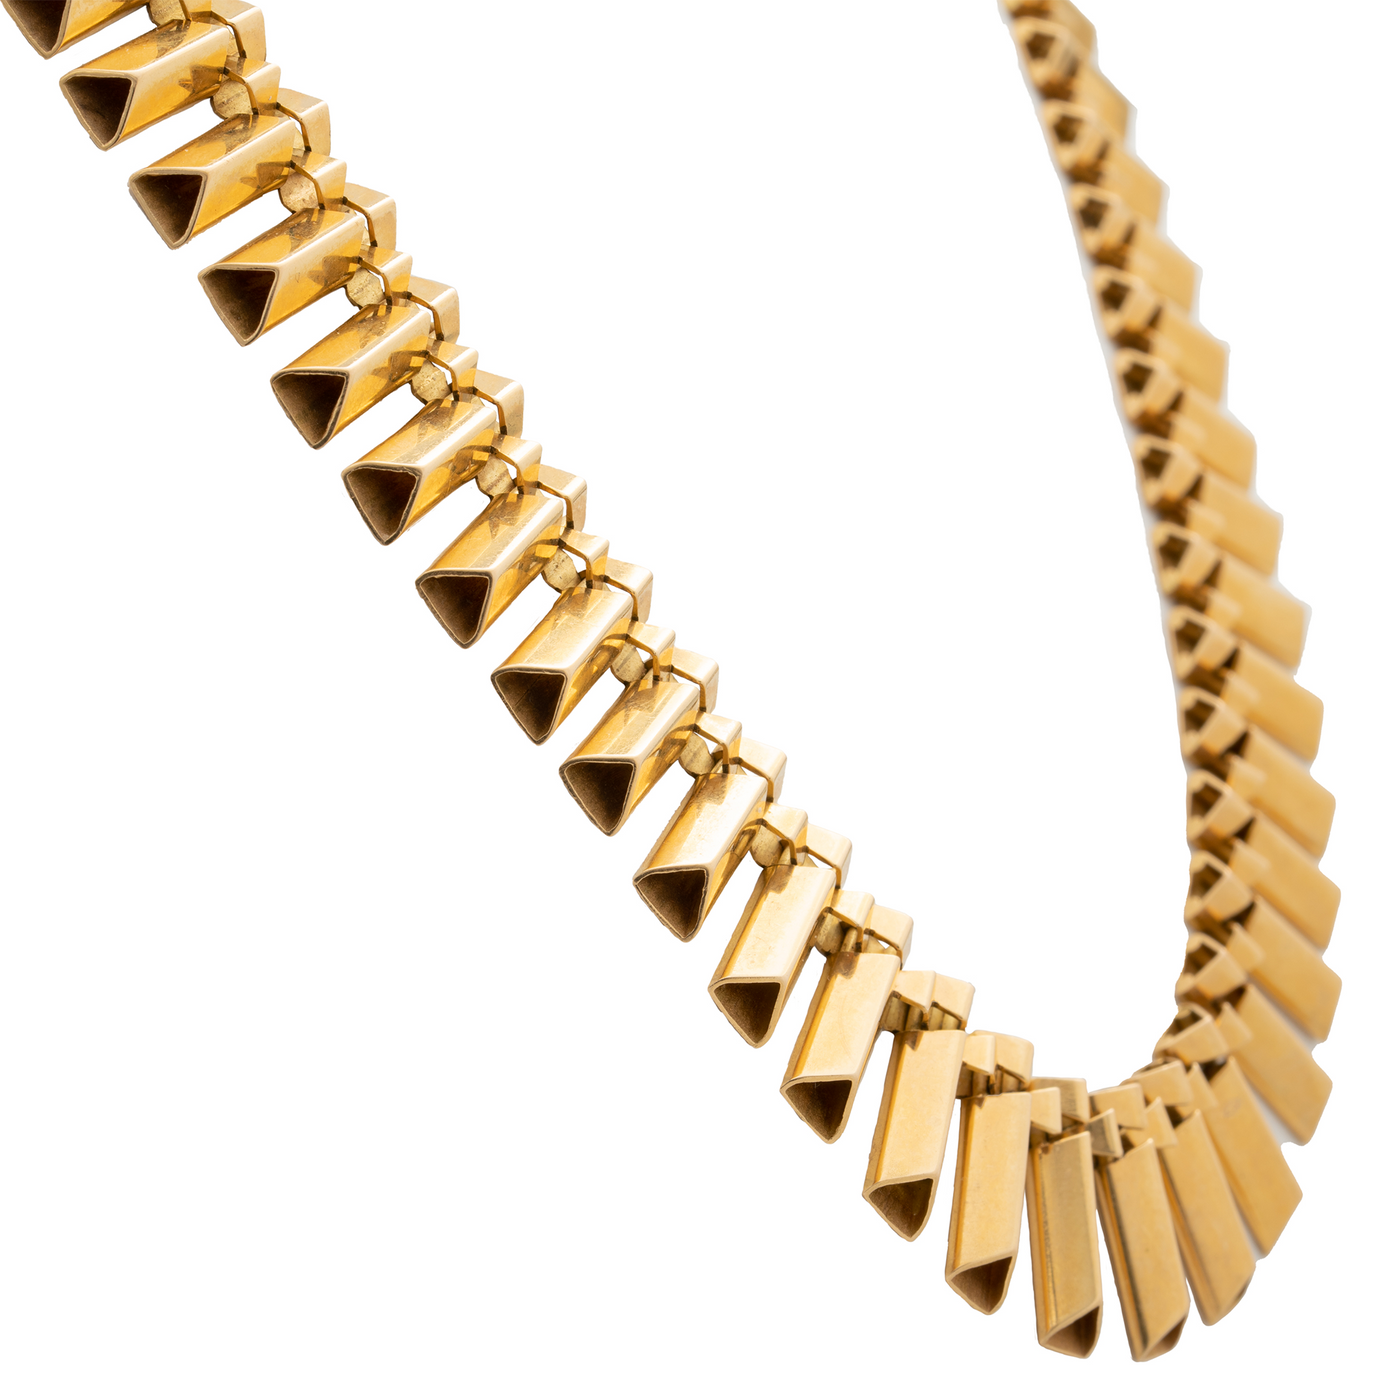 RETRO FRENCH 18K YELLOW GOLD NECKLACE c.1940s